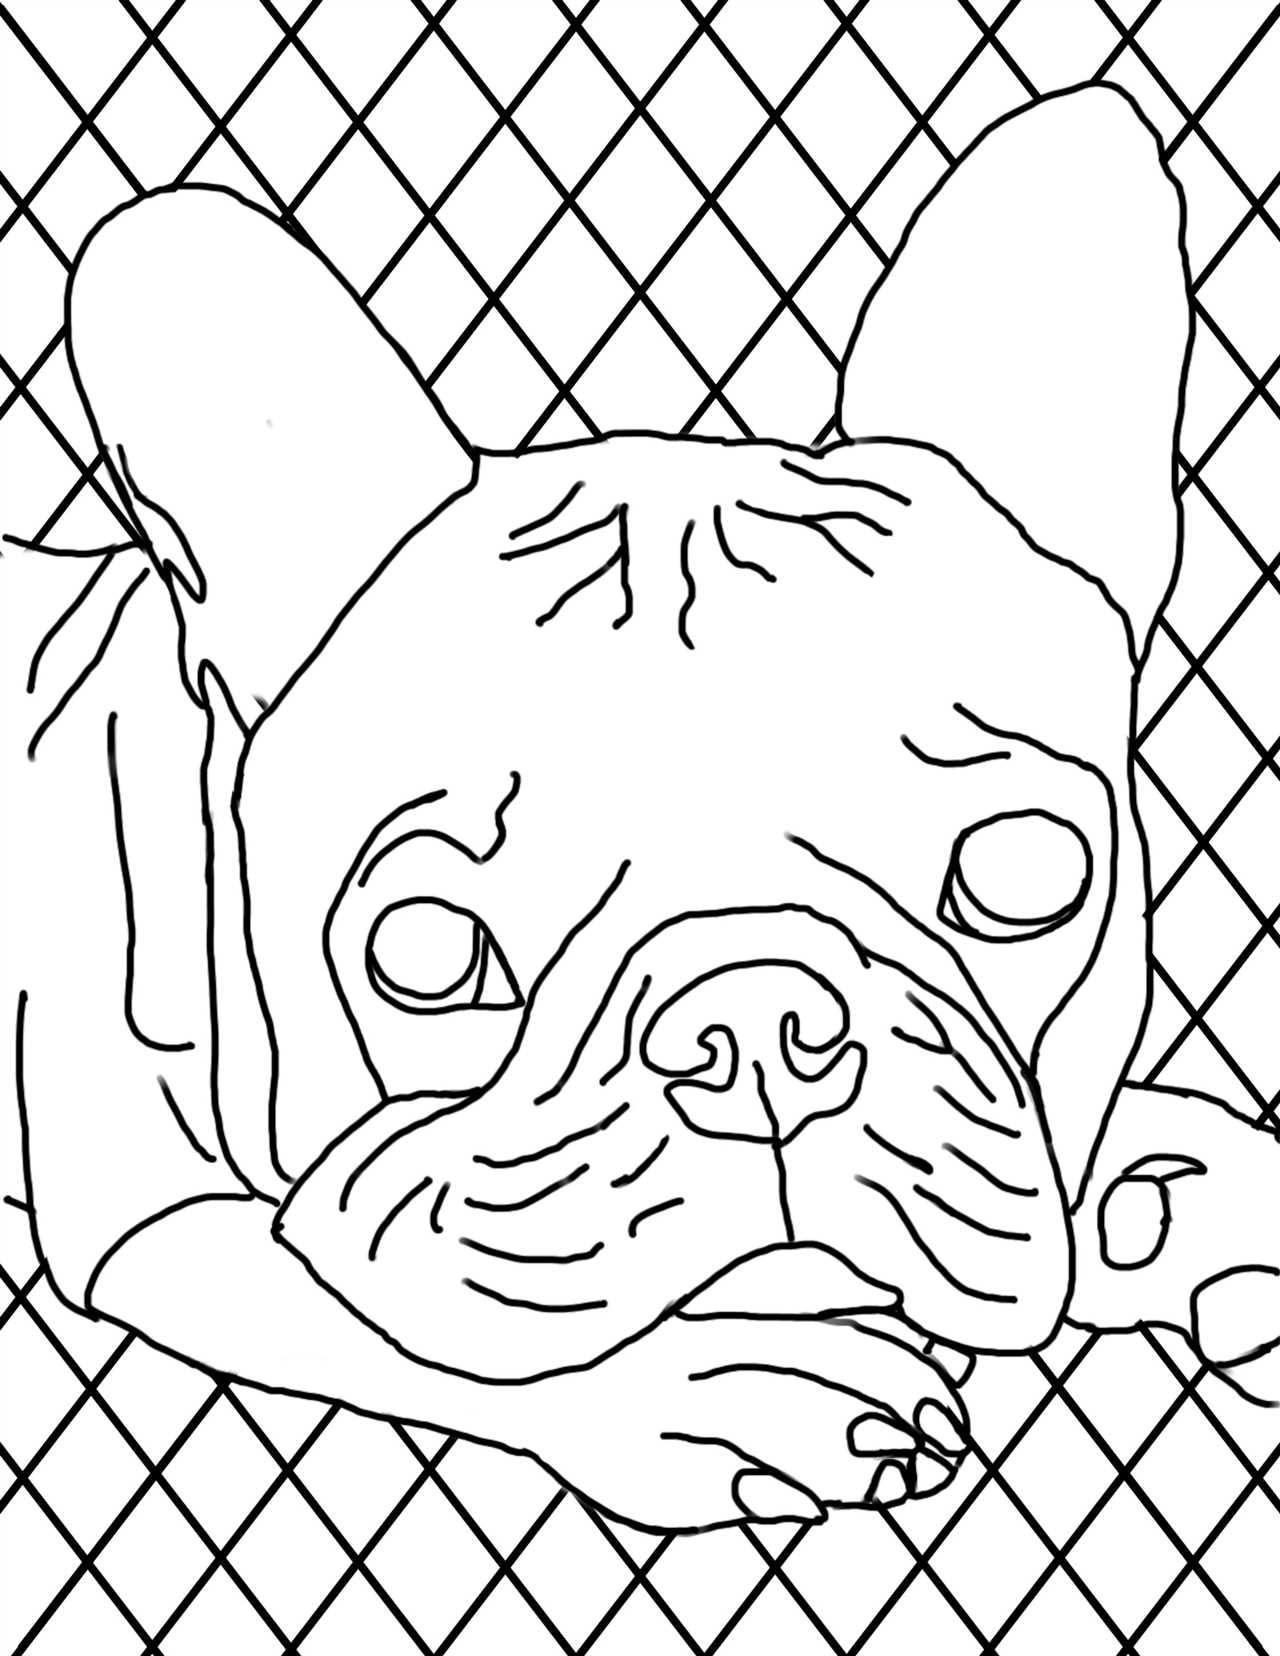 Benefits of Coloring Pages for Dogs